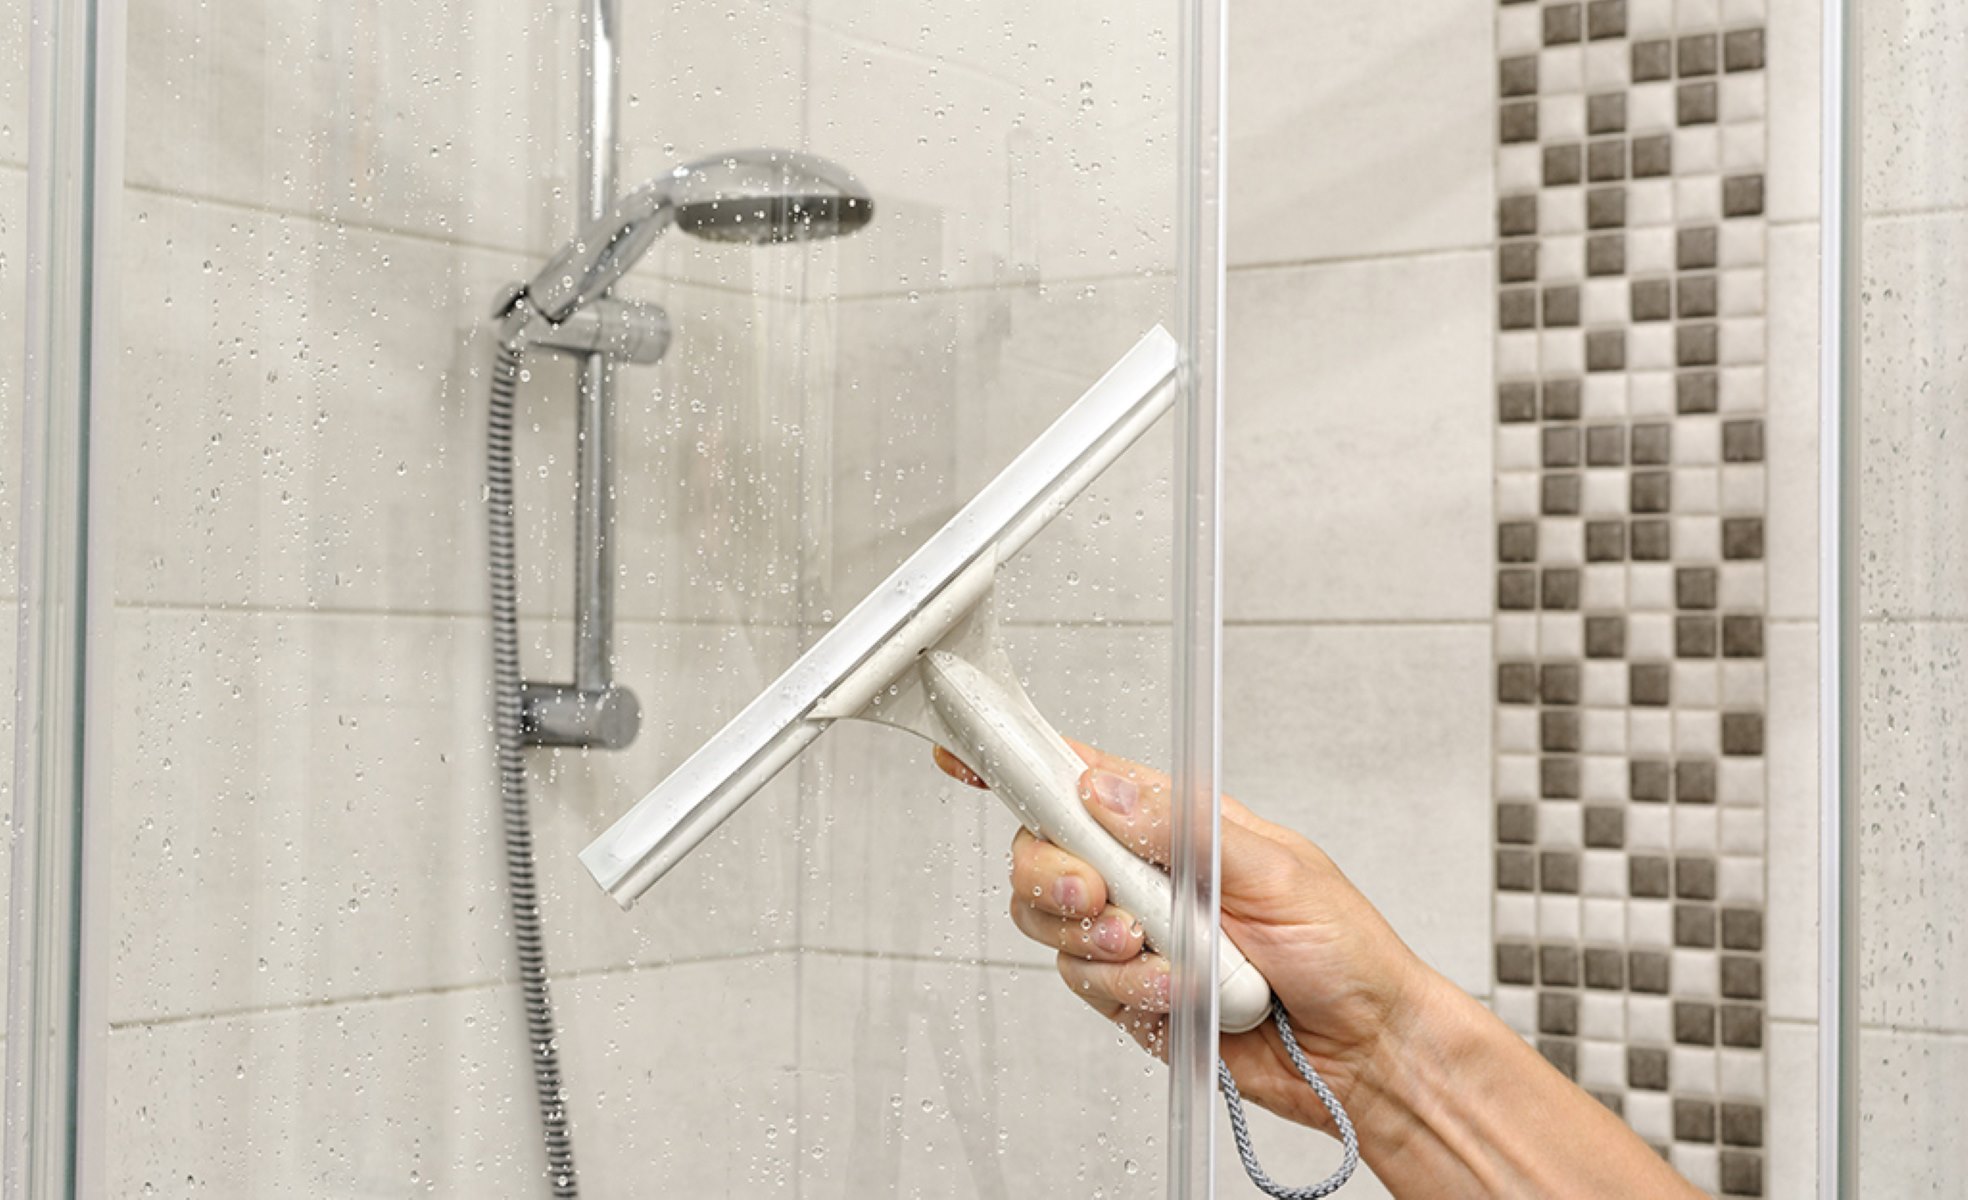 What Do Hotels Use To Clean Glass Shower Doors